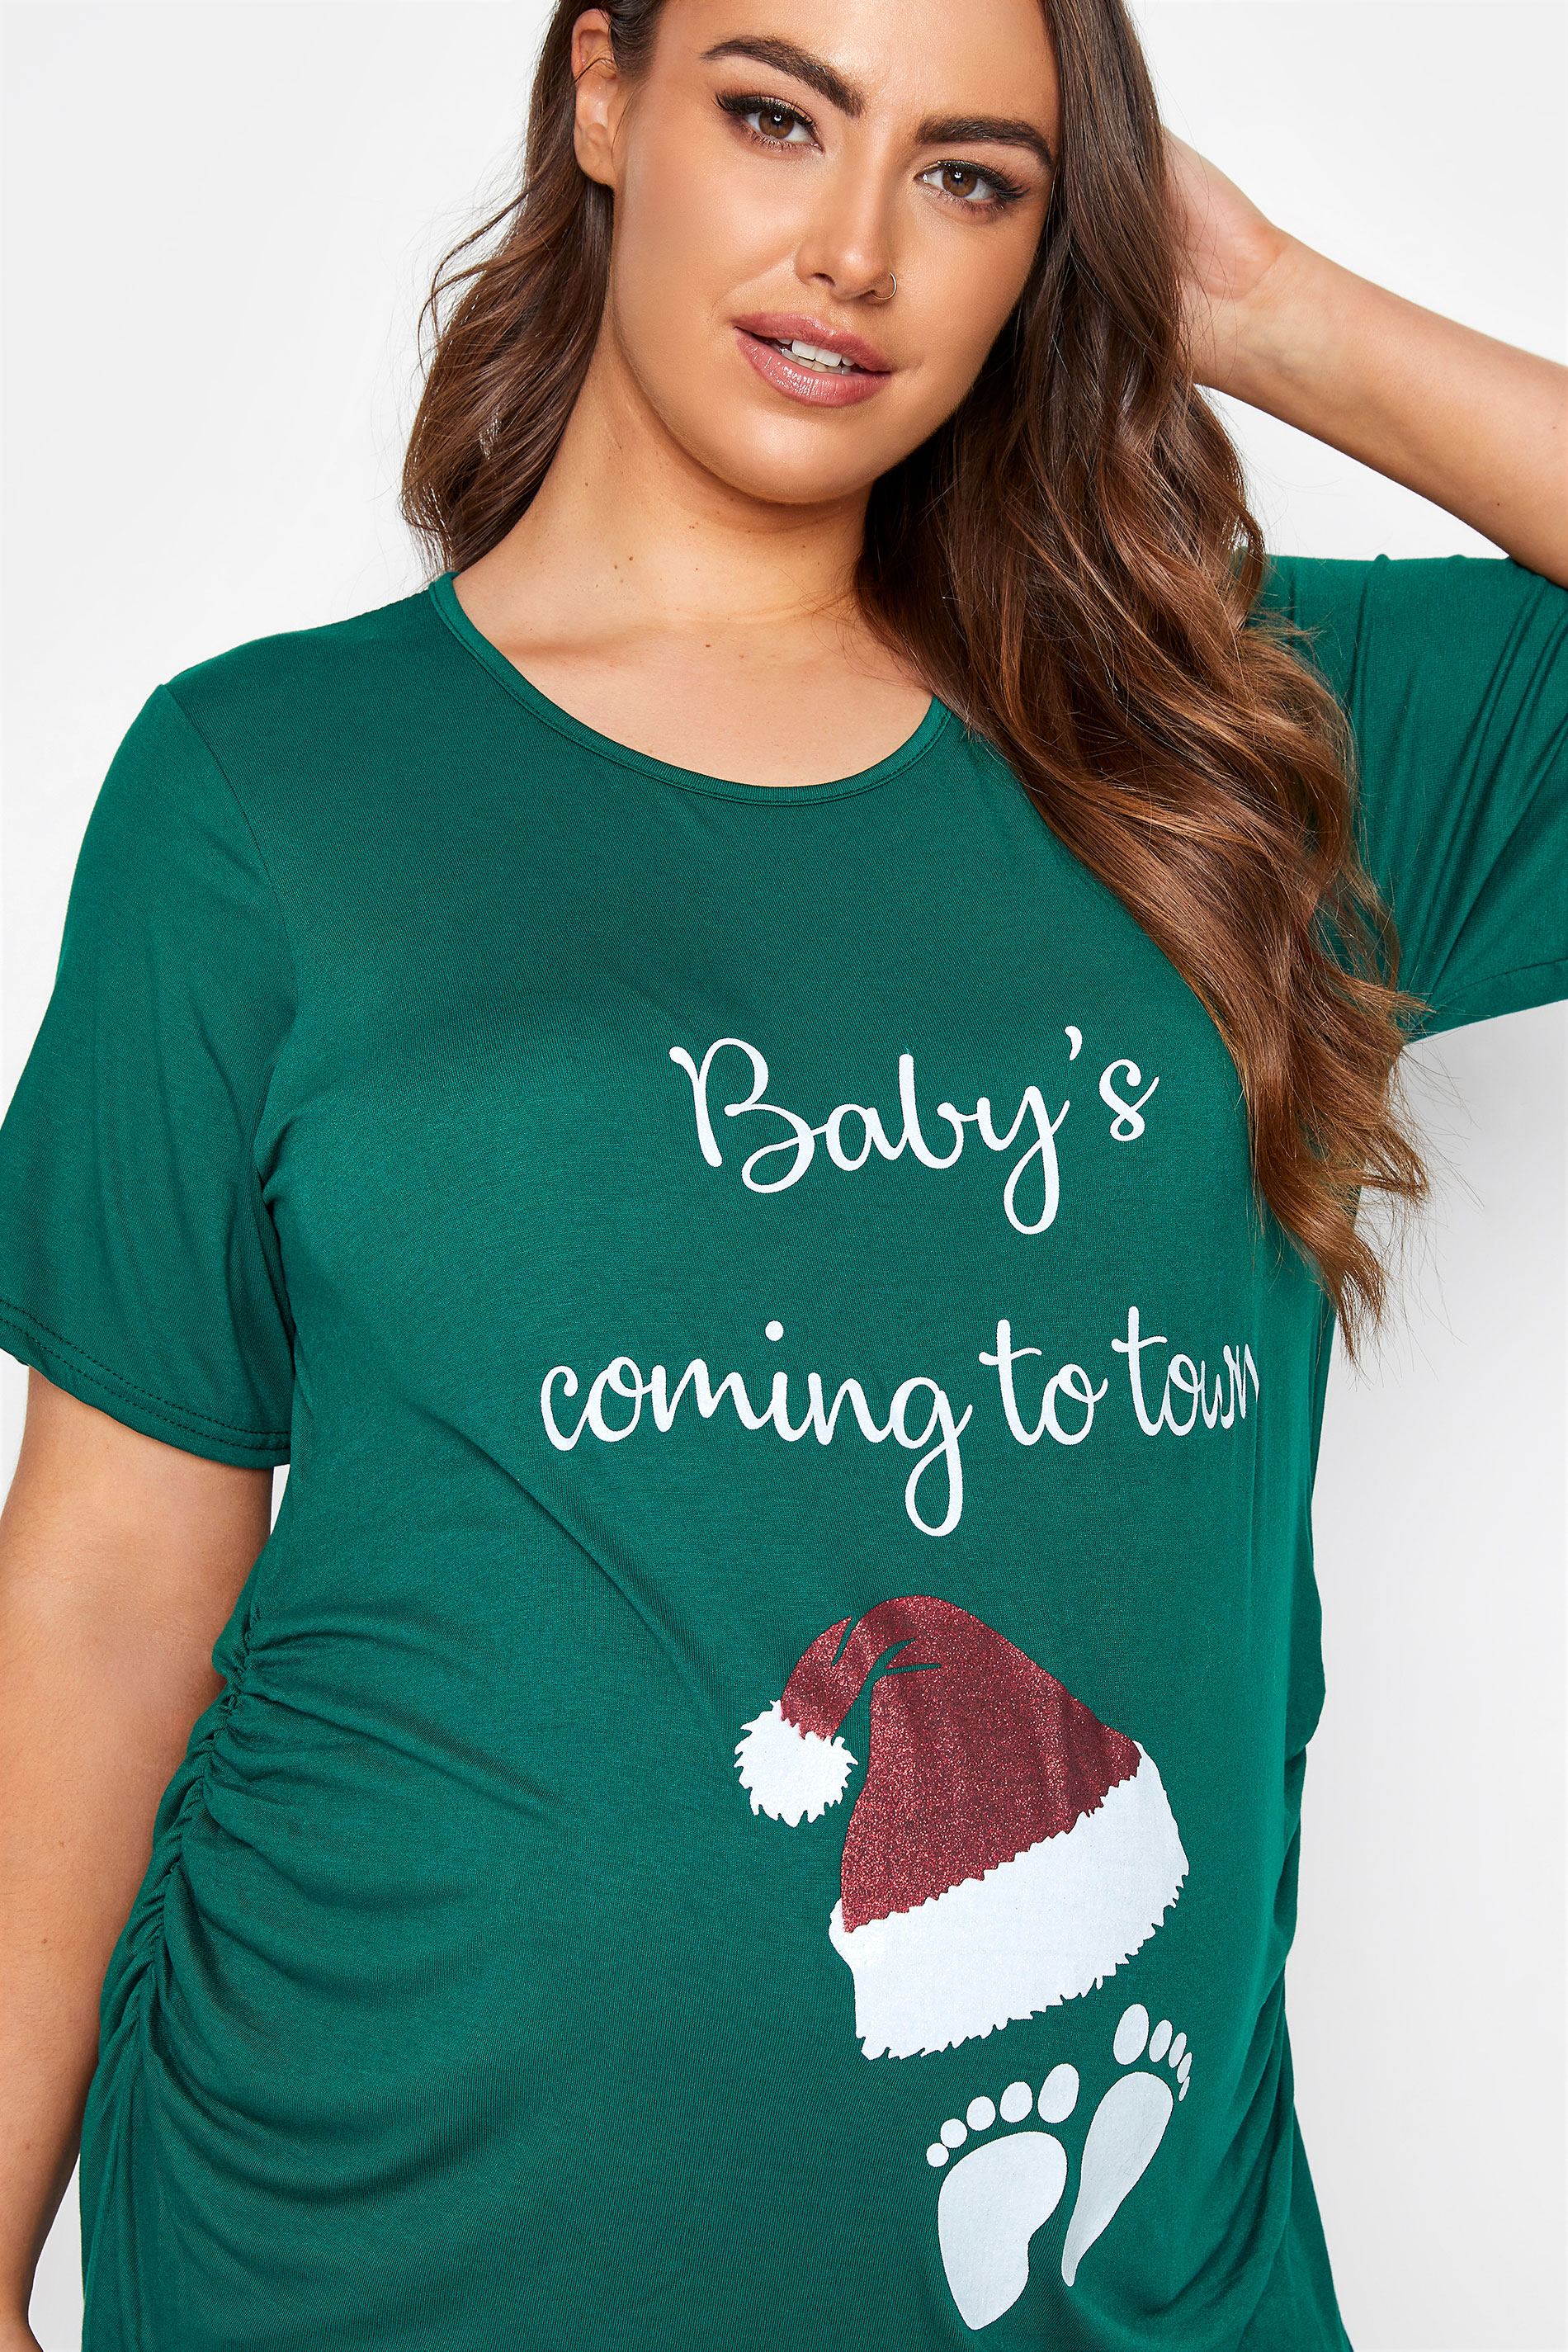 Women's Christmas Tops Maternity Long Sleeve Side Ruched Xmas Santa Baby Print Pregnancy Clothes 